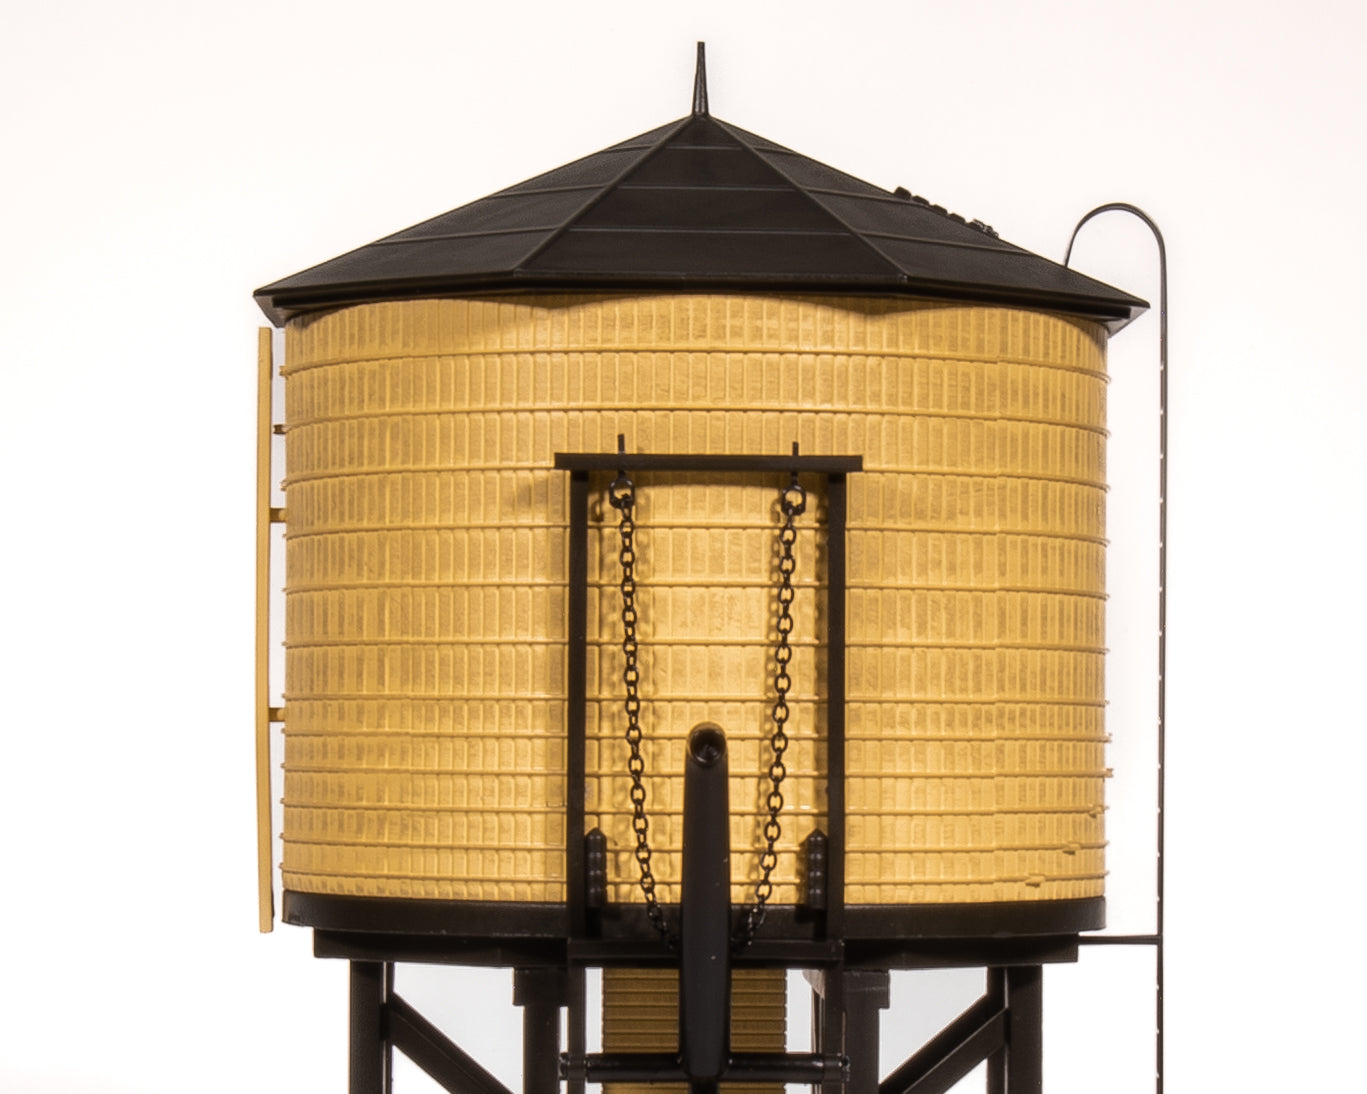 7923 Operating Water Tower w/ Sound, SP, Weathered, HO Default Title